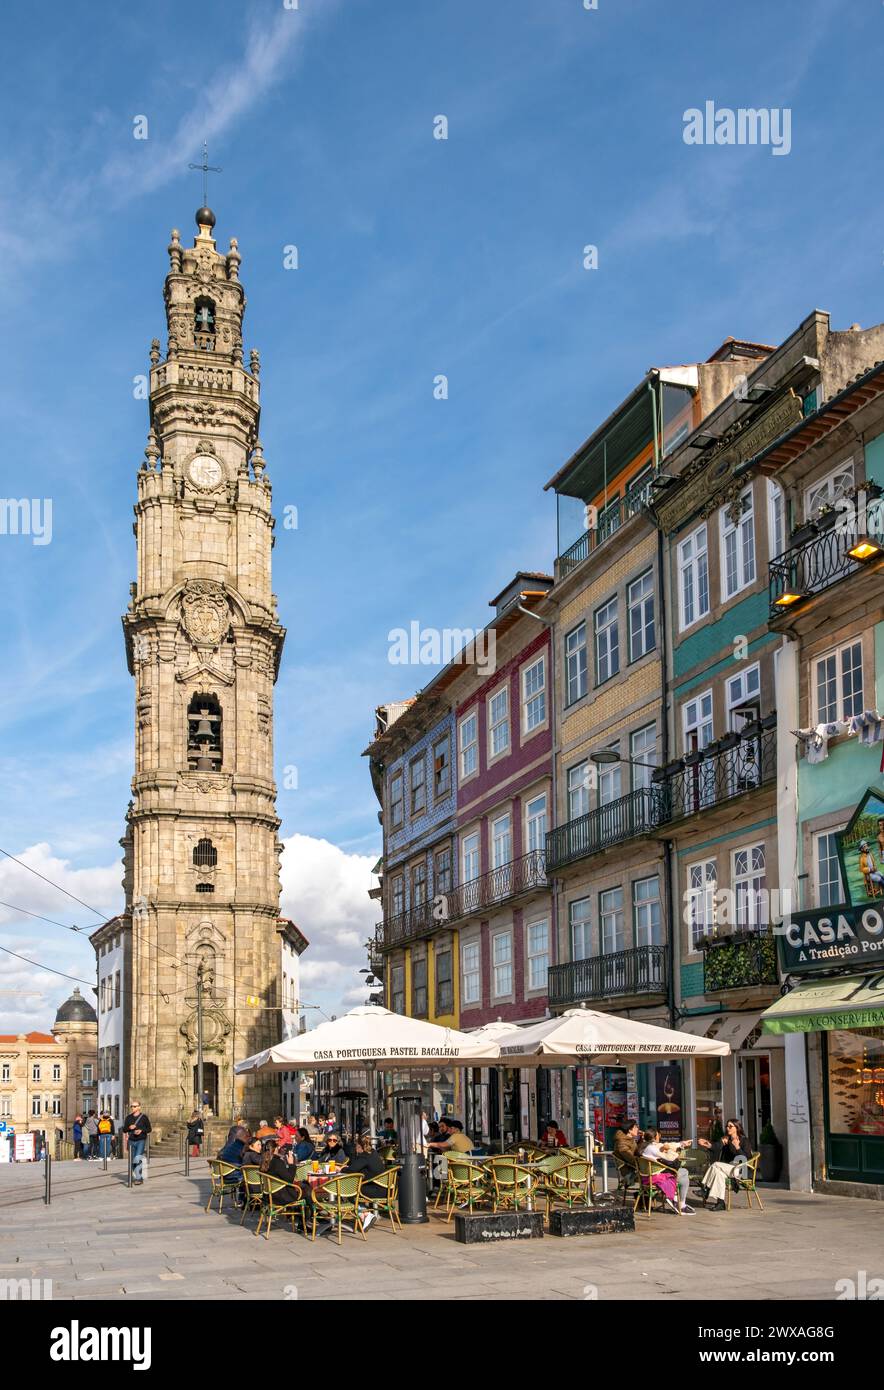 The Clérigos Church Tower  stands tall over the surrounding square, Porto, Portugal Stock Photo